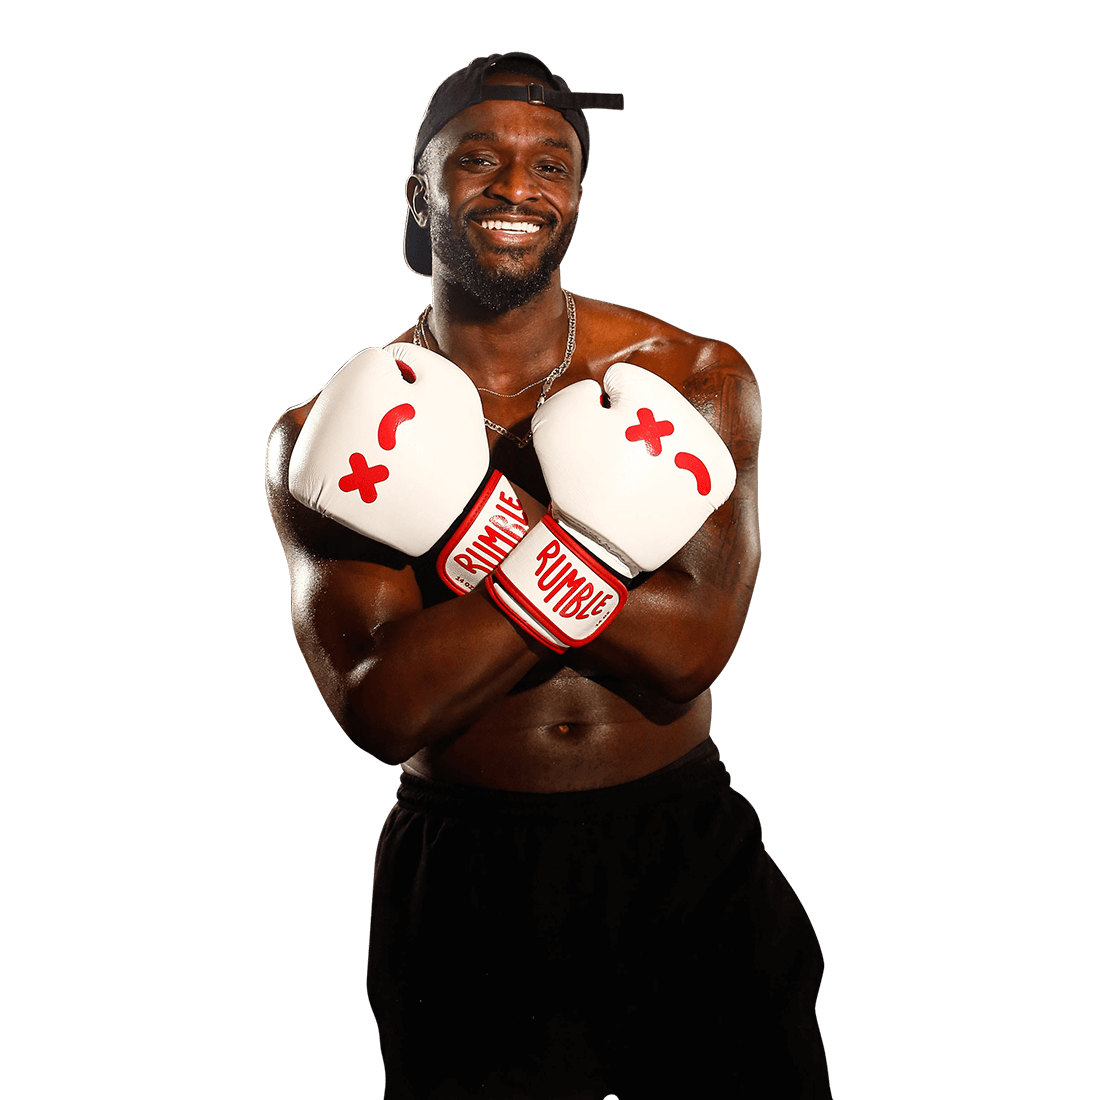 Man posing with boxing gloves